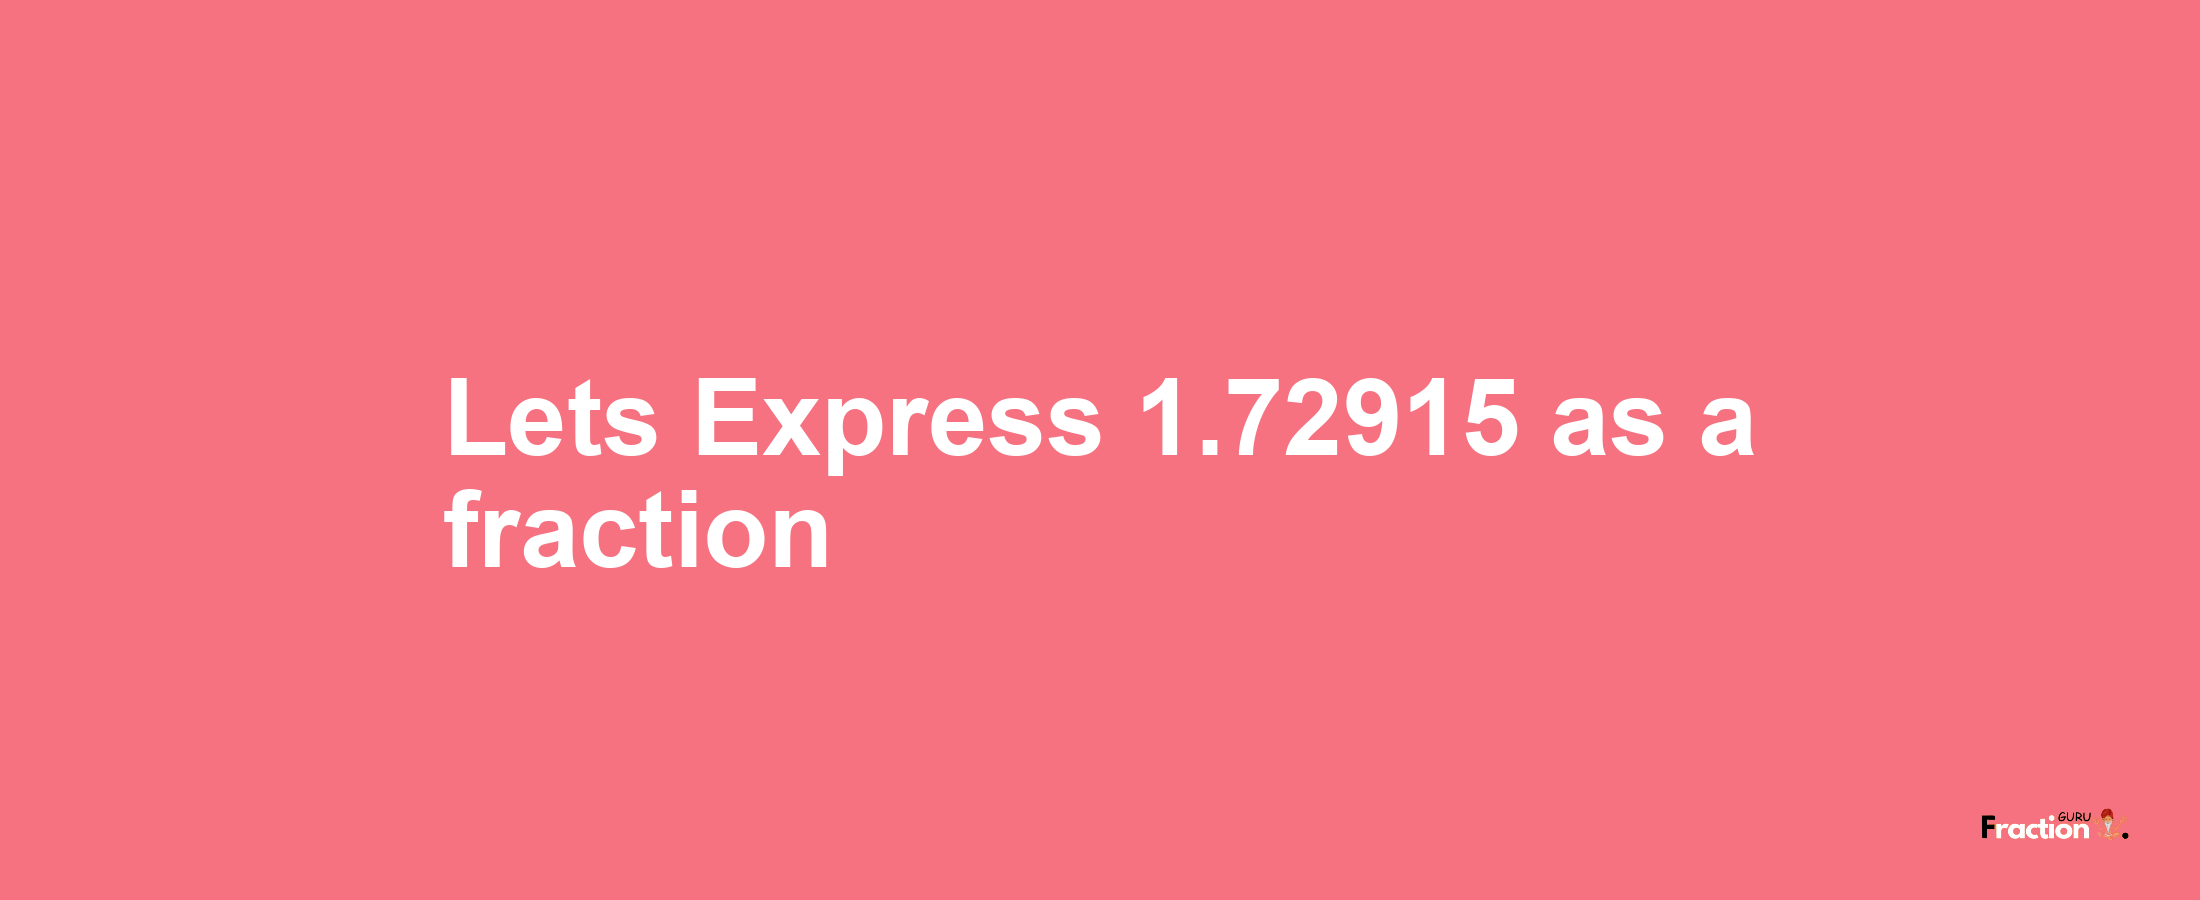 Lets Express 1.72915 as afraction